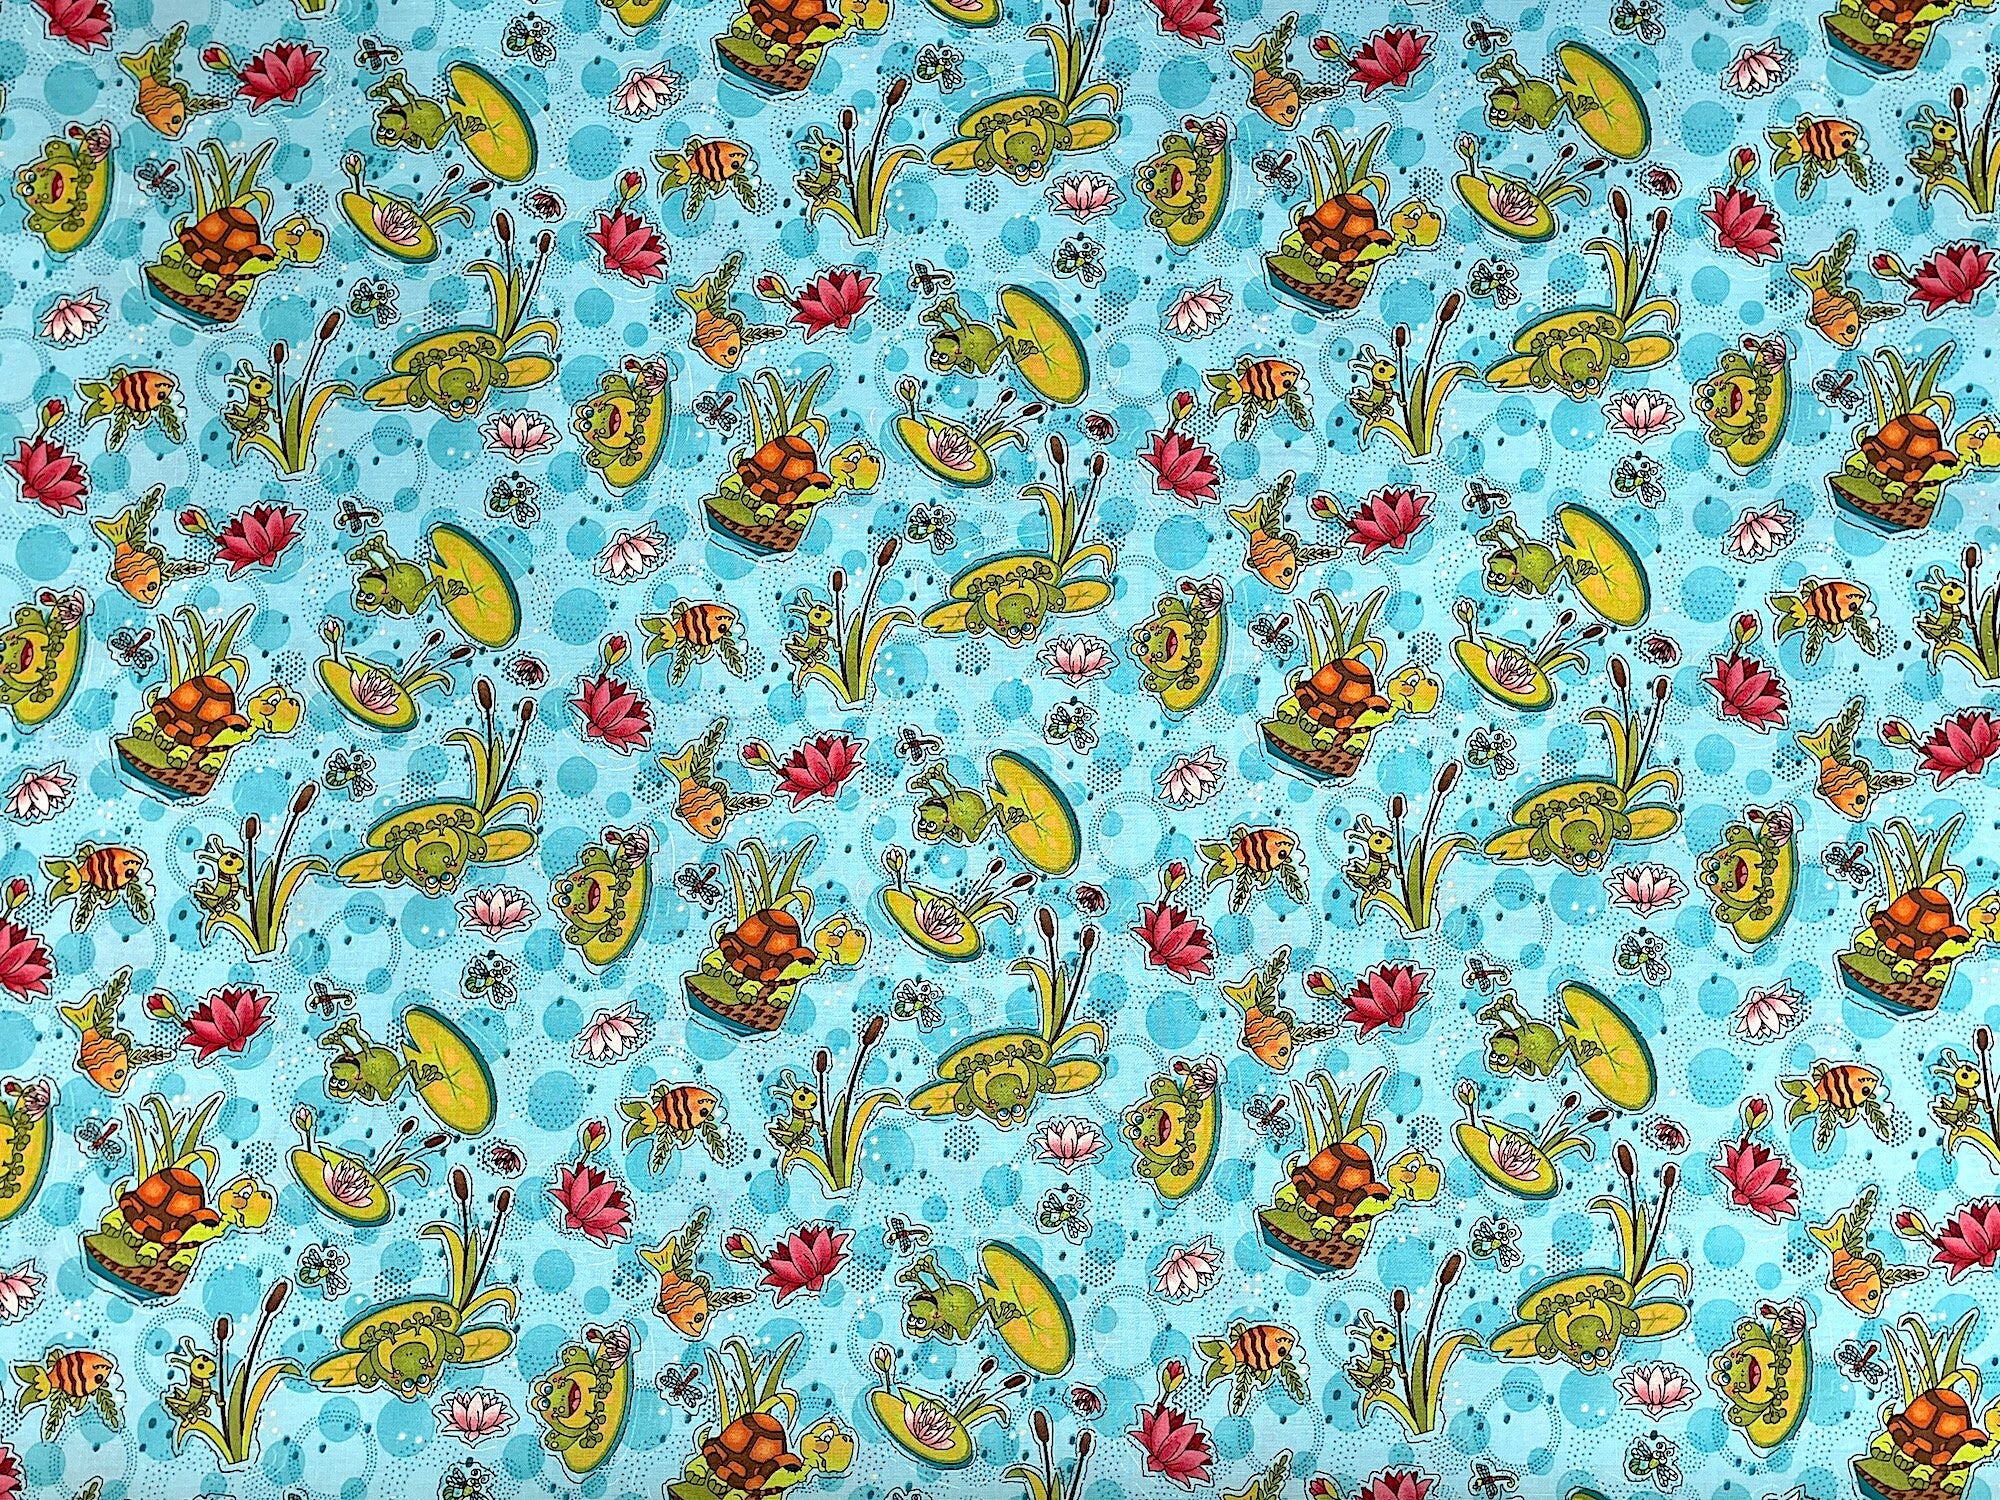 This cotton fabric is called Water Lily and is covered with frogs, fish, grasshoppers, water lilies and more. 